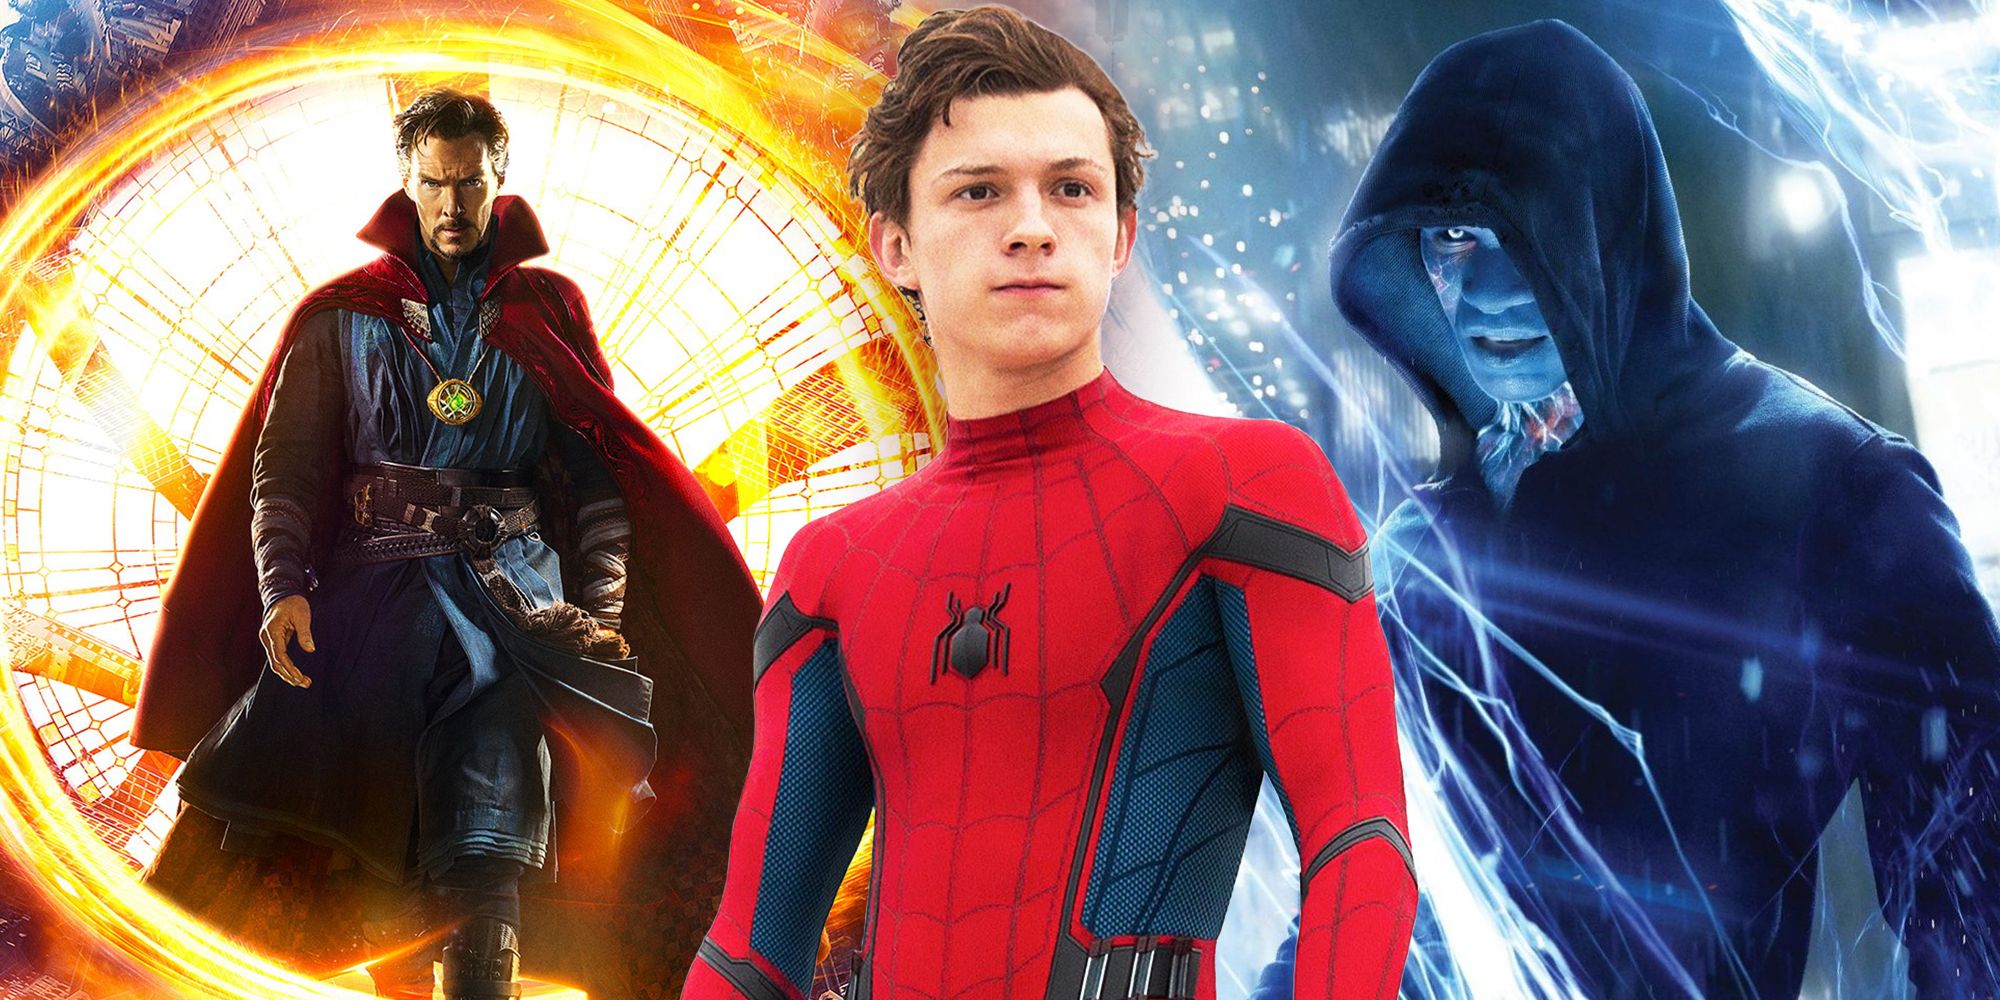 Peter Parker, Doctor Strange, and Electro in the MCU's Spider-Man Homecoming 3